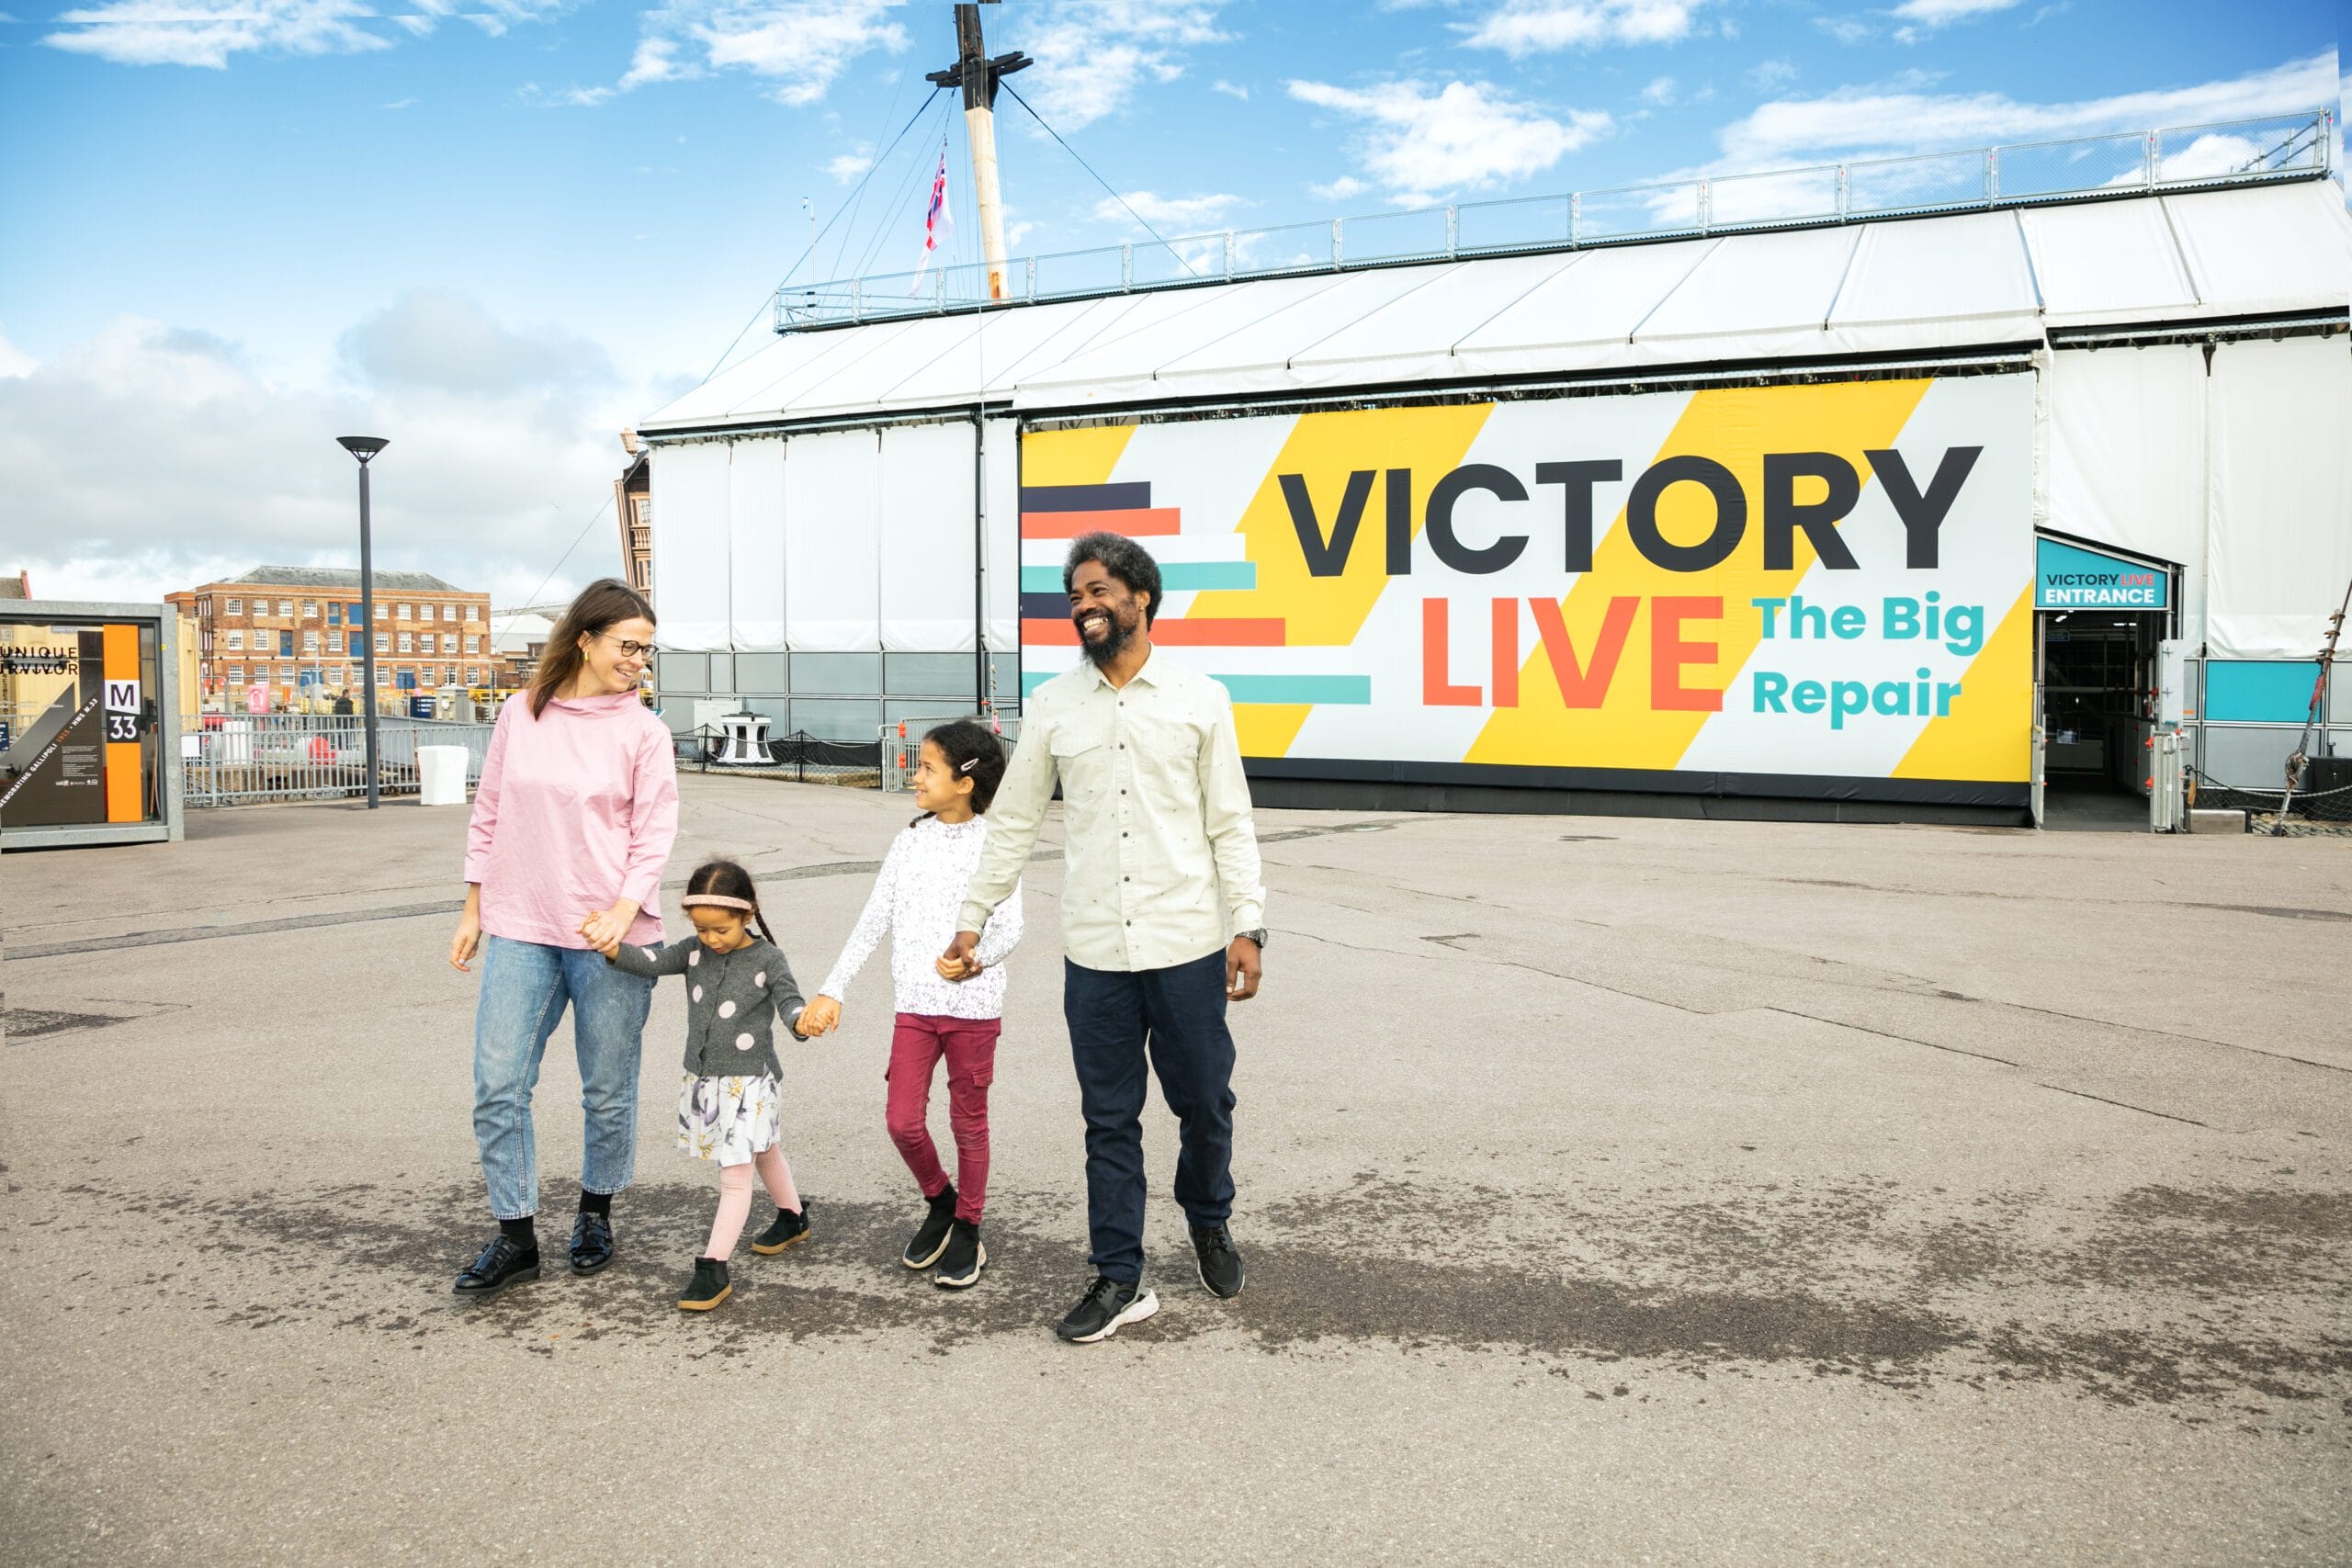 A family walking away from HMS Victory after enjoying the Victory Live exhibition